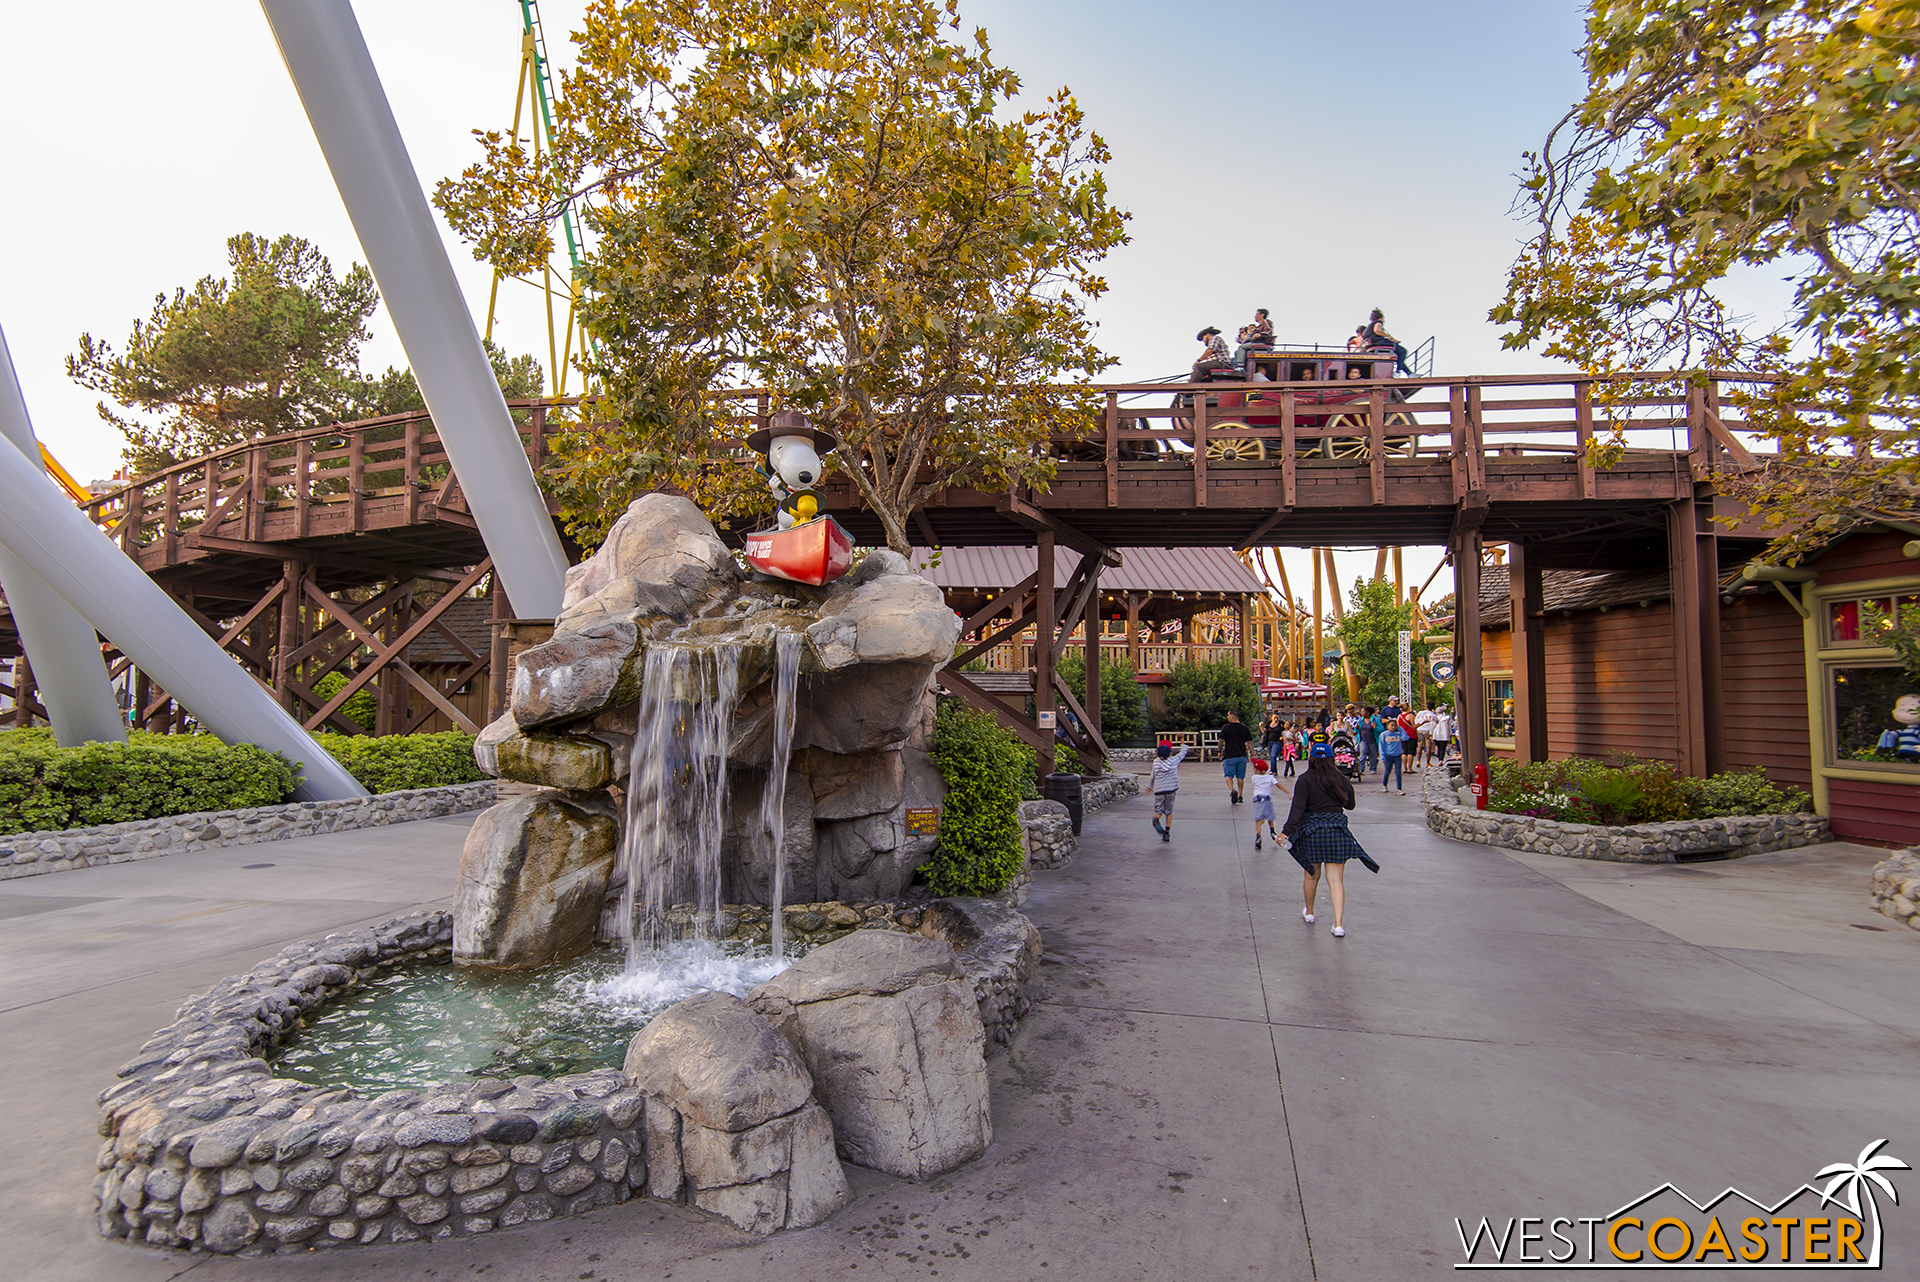  Entering the future home of The Hollow (new for Knott's Scary Farm 2016). 